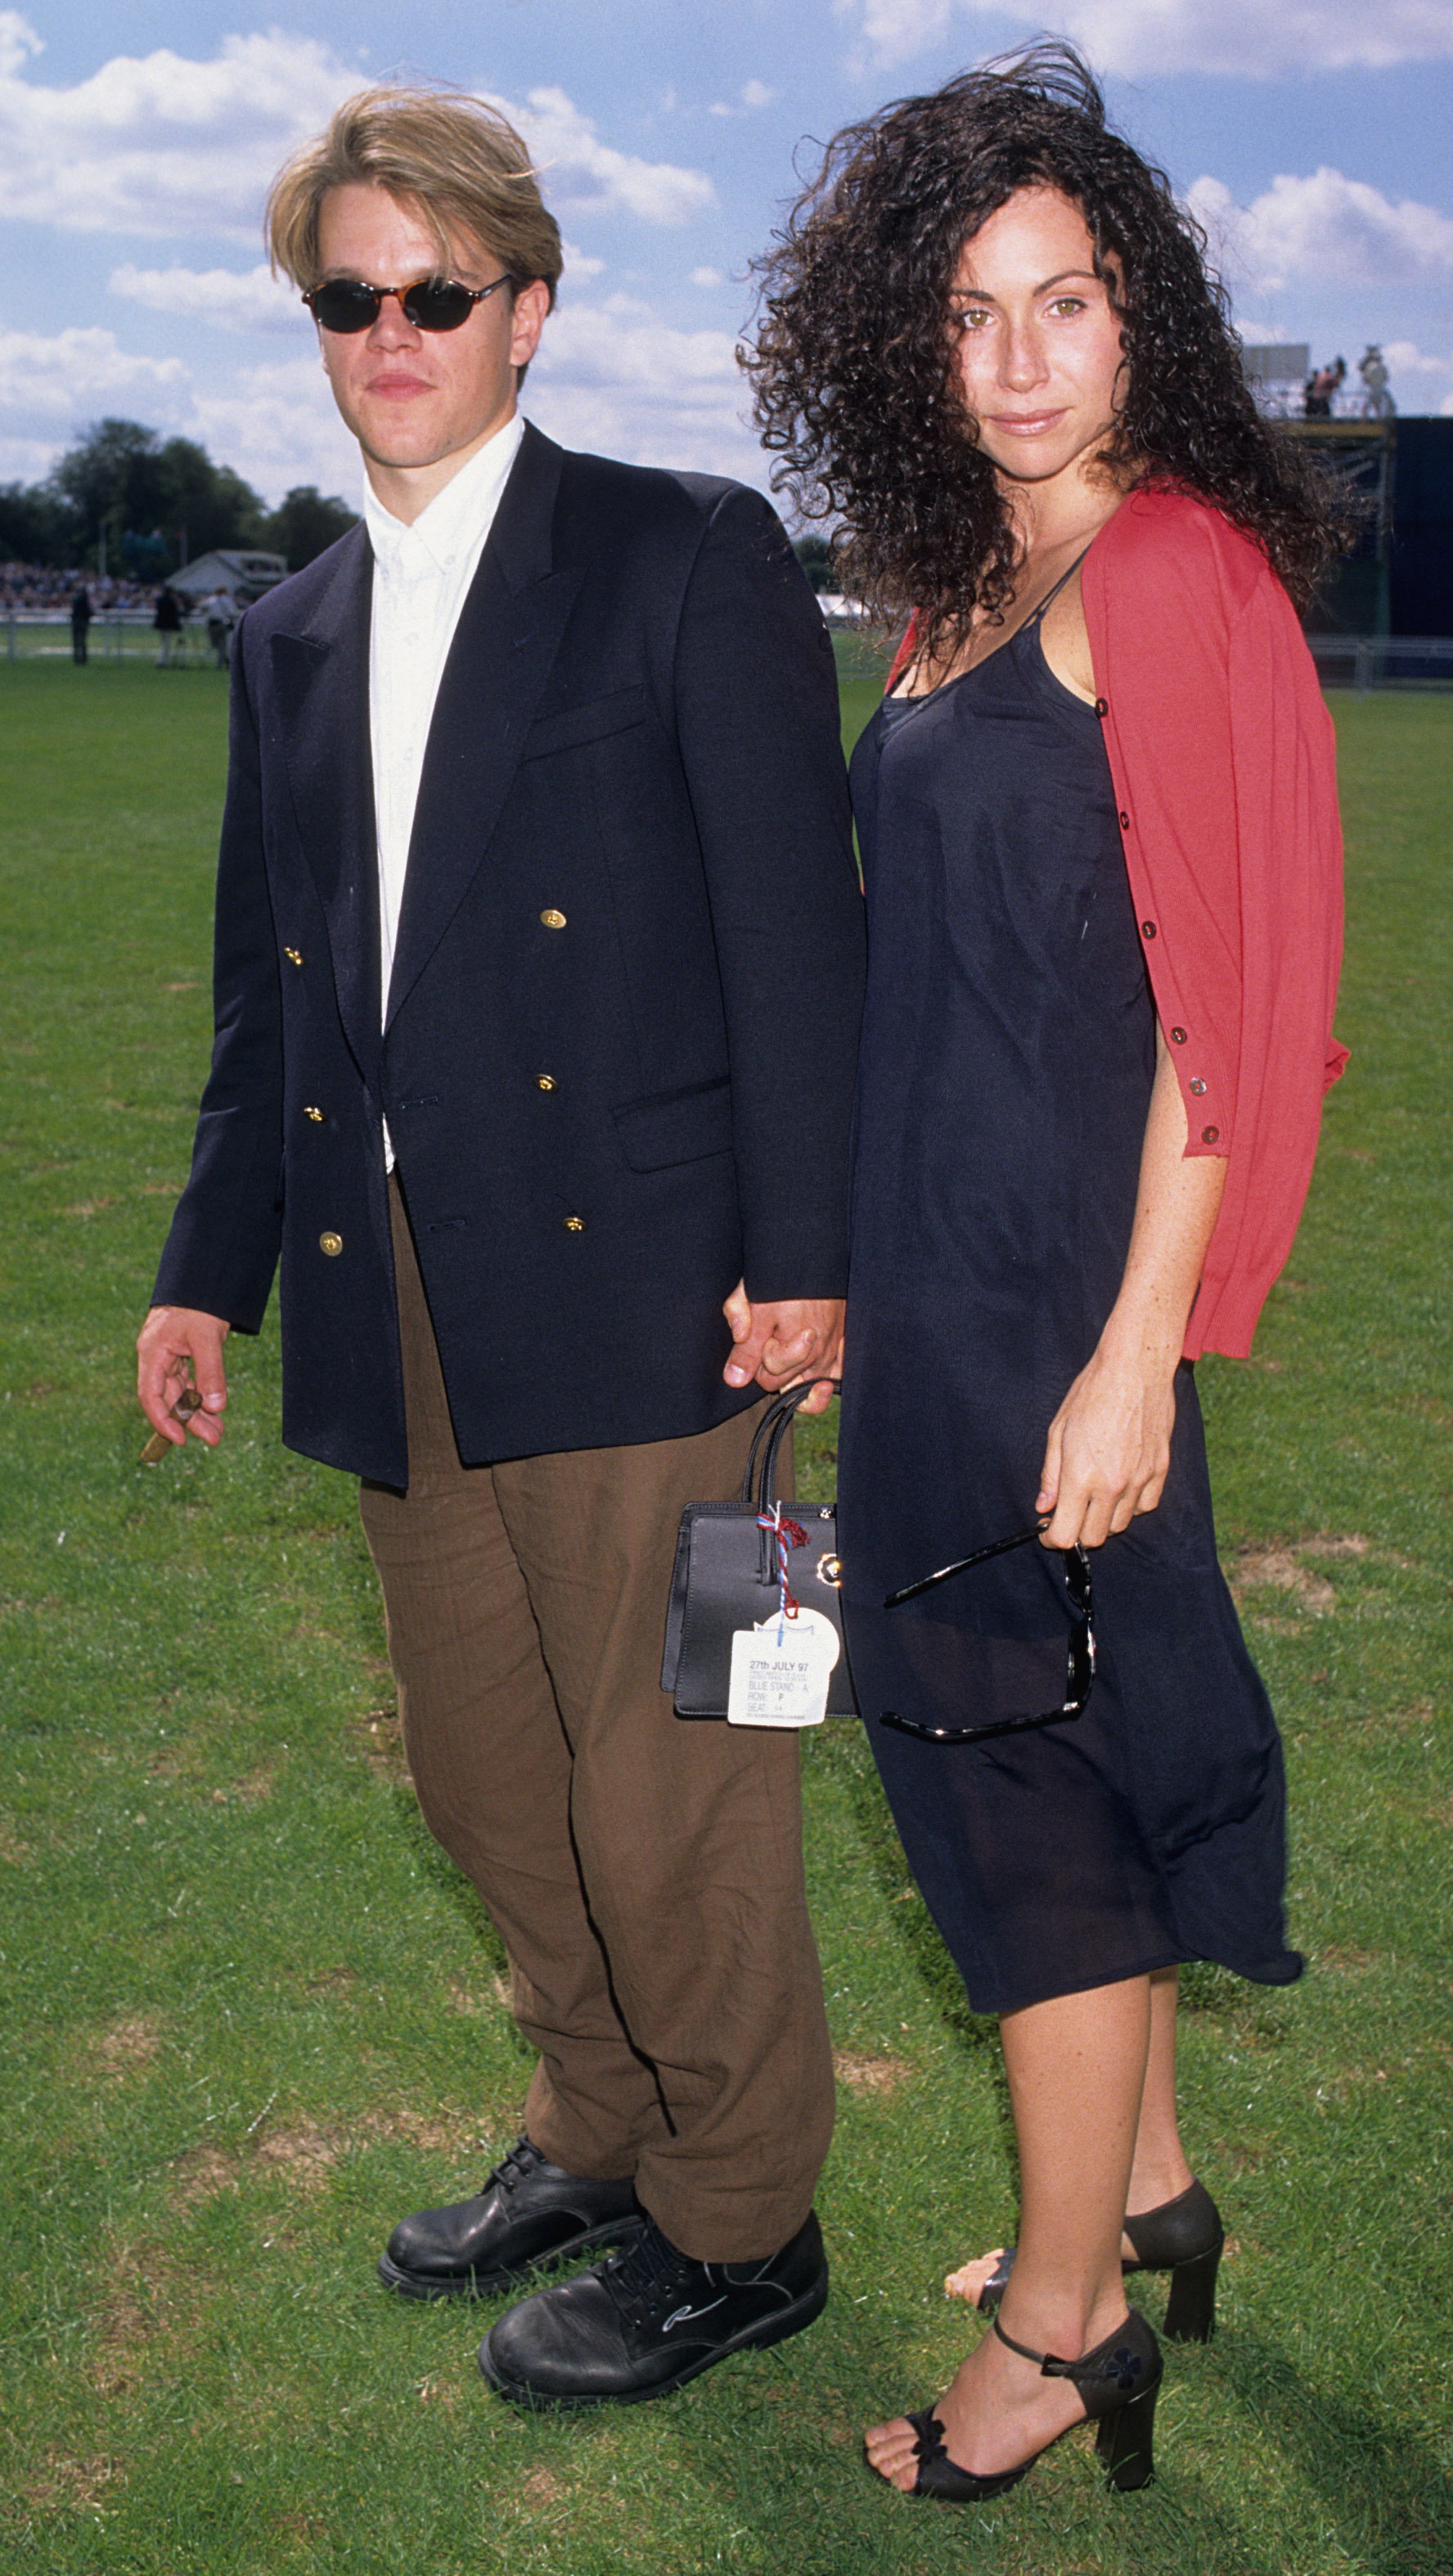 Minnie Driver and Matt Damon during 1997 Cartier International Polo in Windsor, United Kingdom on July 01.1997. | Source: Getty Images